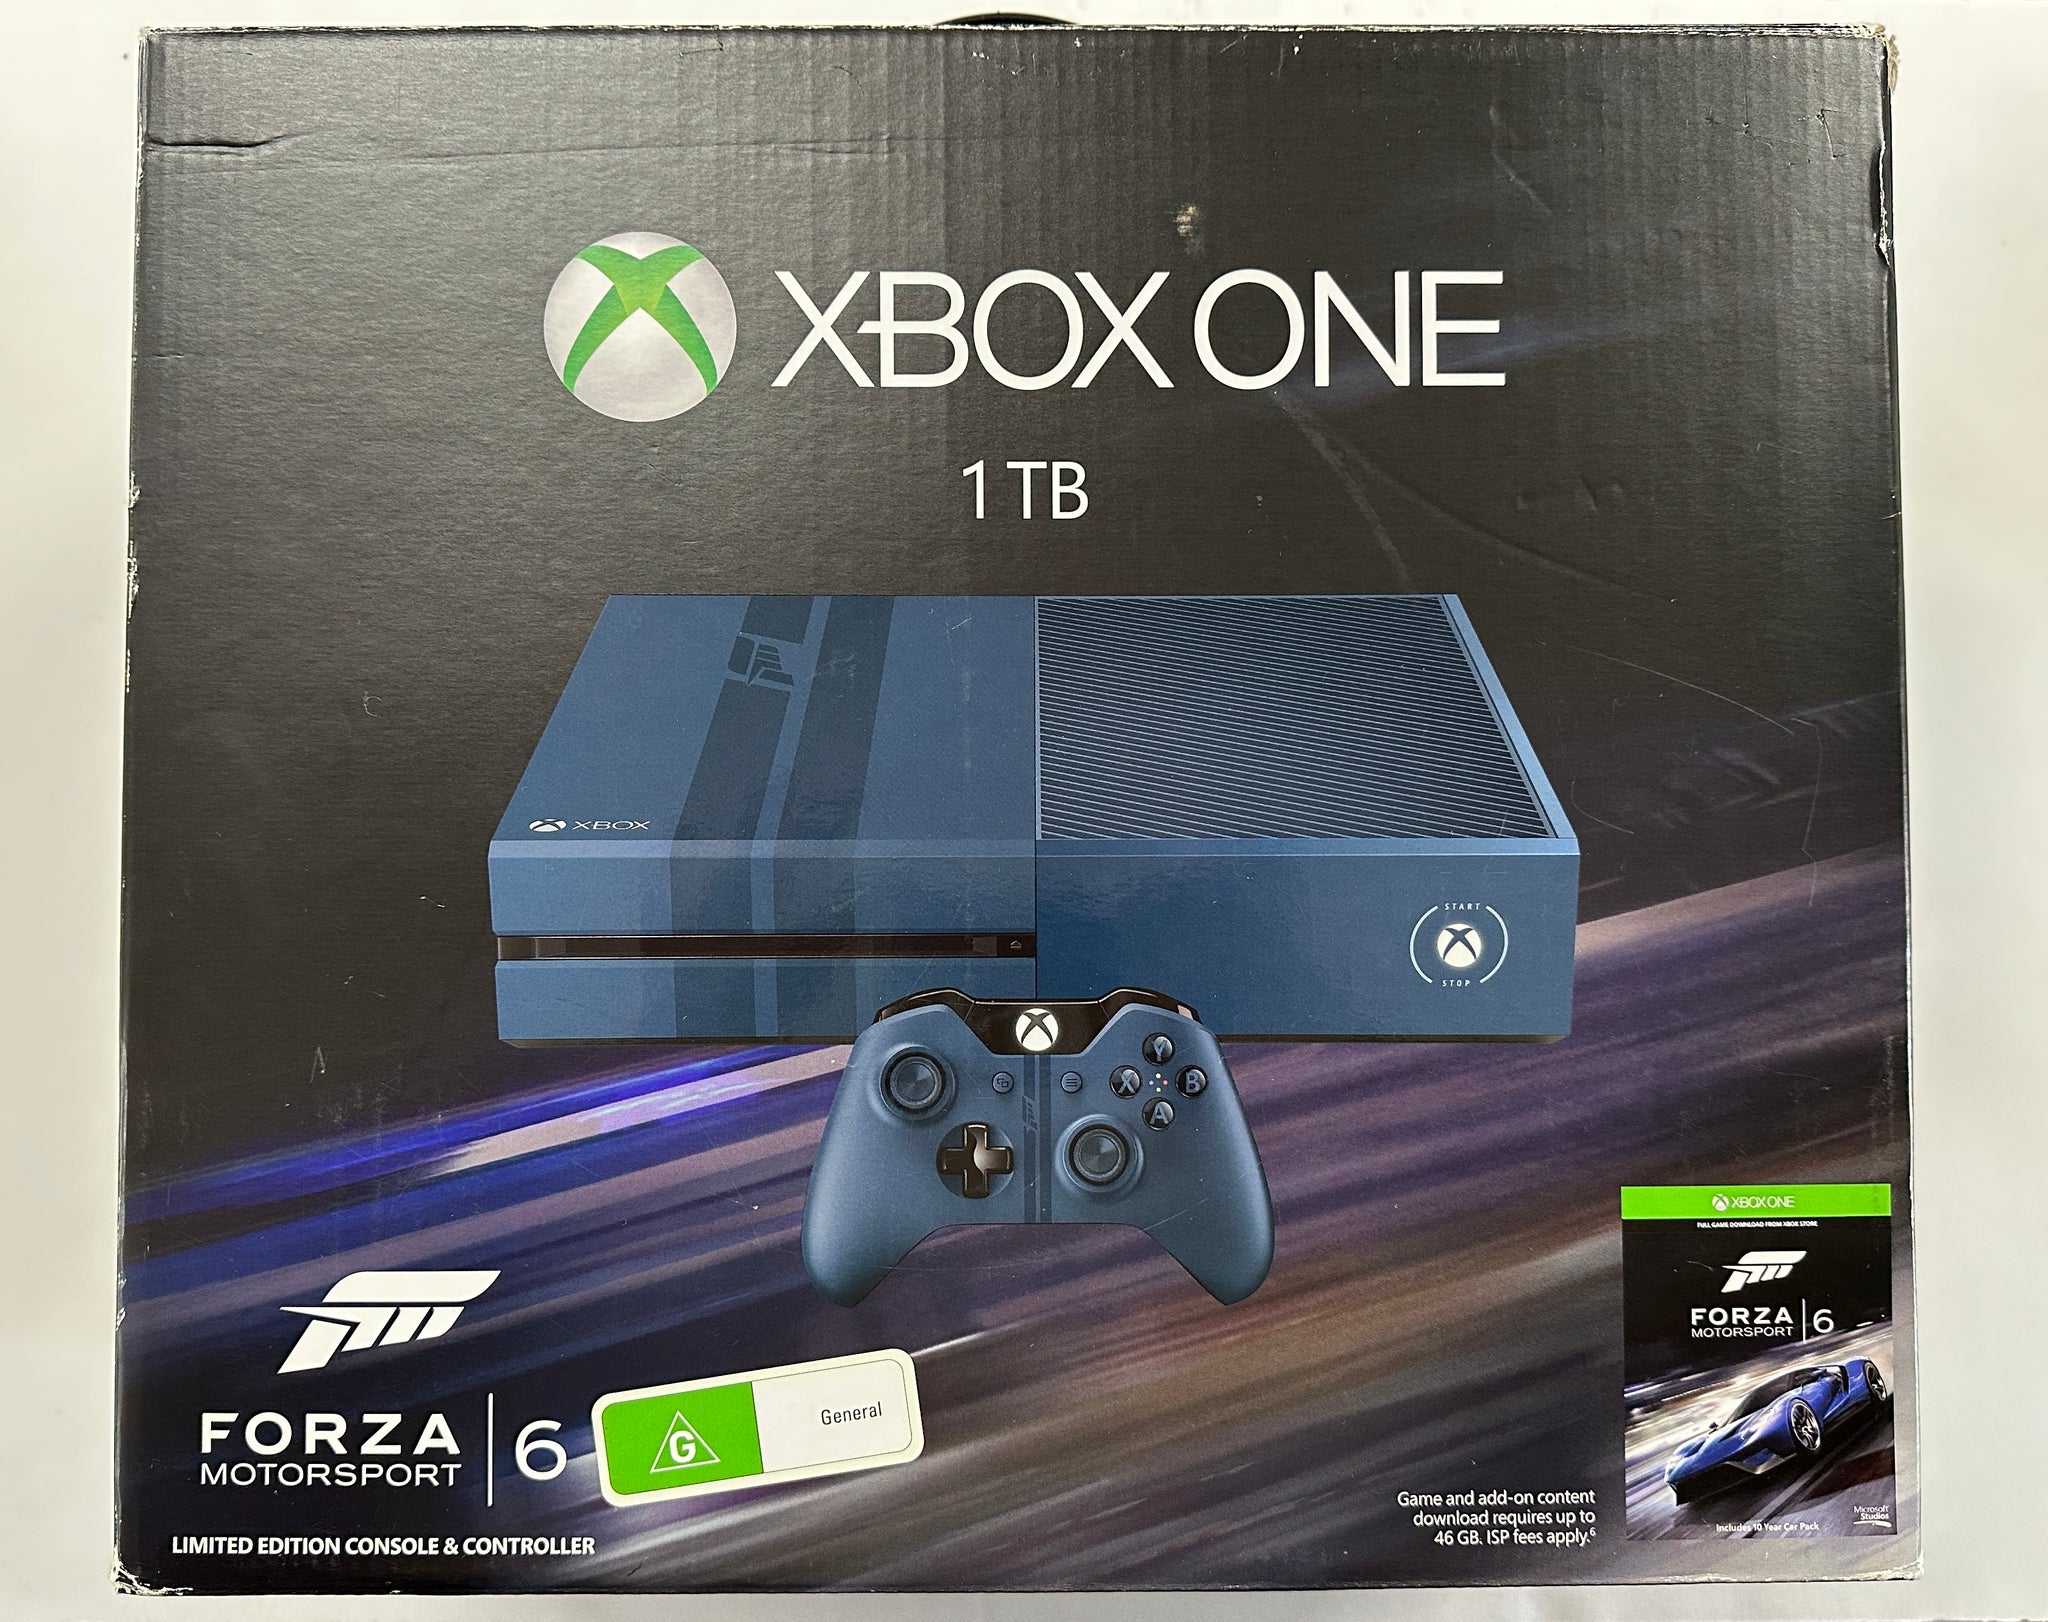 Microsoft XBOX One 1TB Limited Edition Forza Motorsport 6 Console